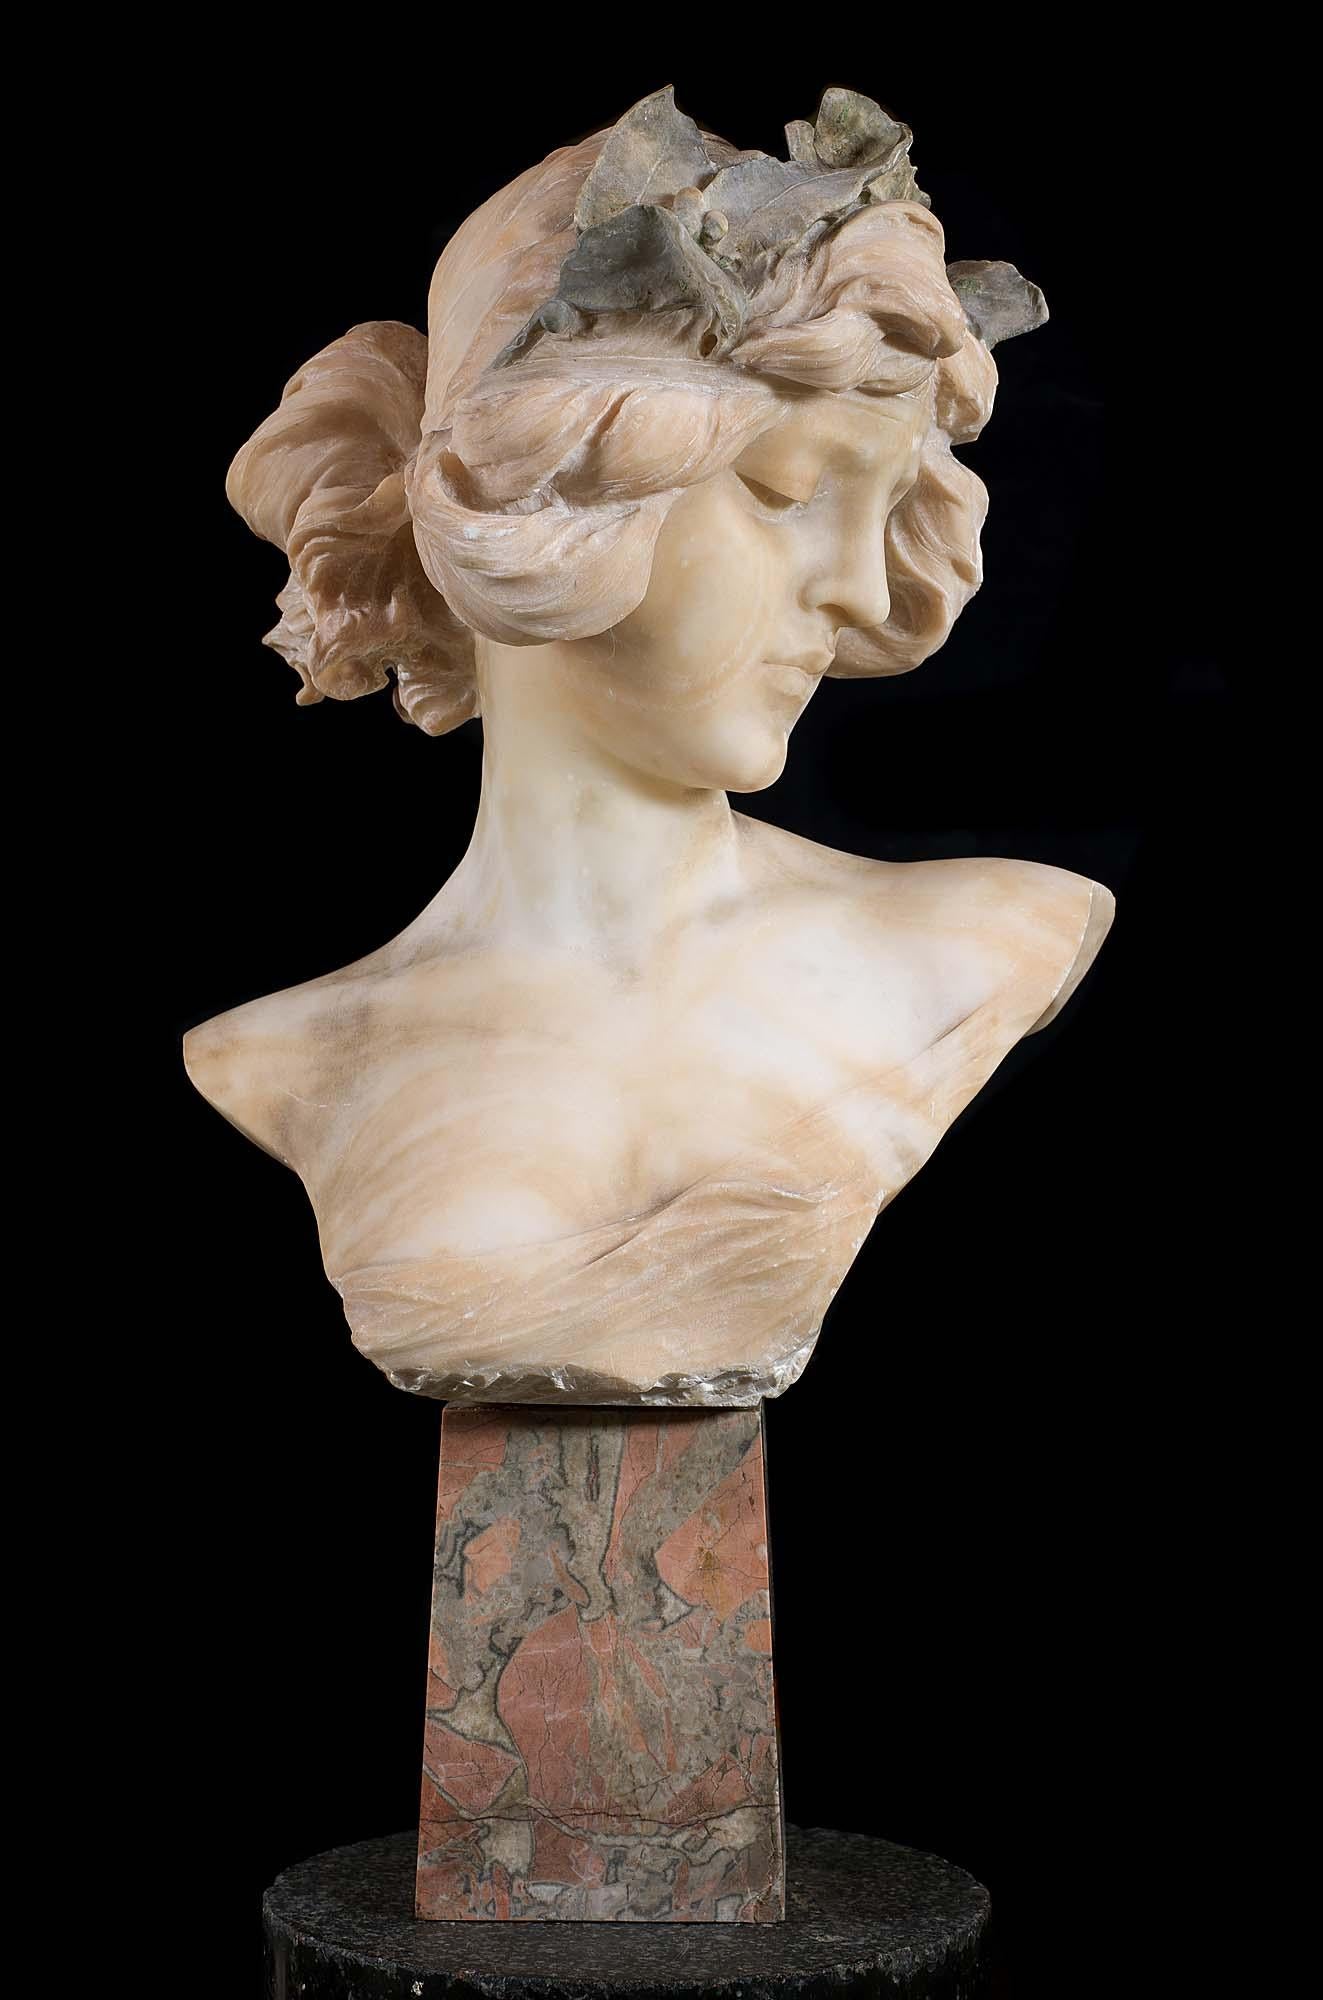 A charming and finely carved Alabaster bust of an Art Nouveau woman with demurely downcast cast eyes. Her casually elegant hairstyle is adorned with an entwined leaf wreath and she is raised on a rouge and grey marble base. English, late 19th